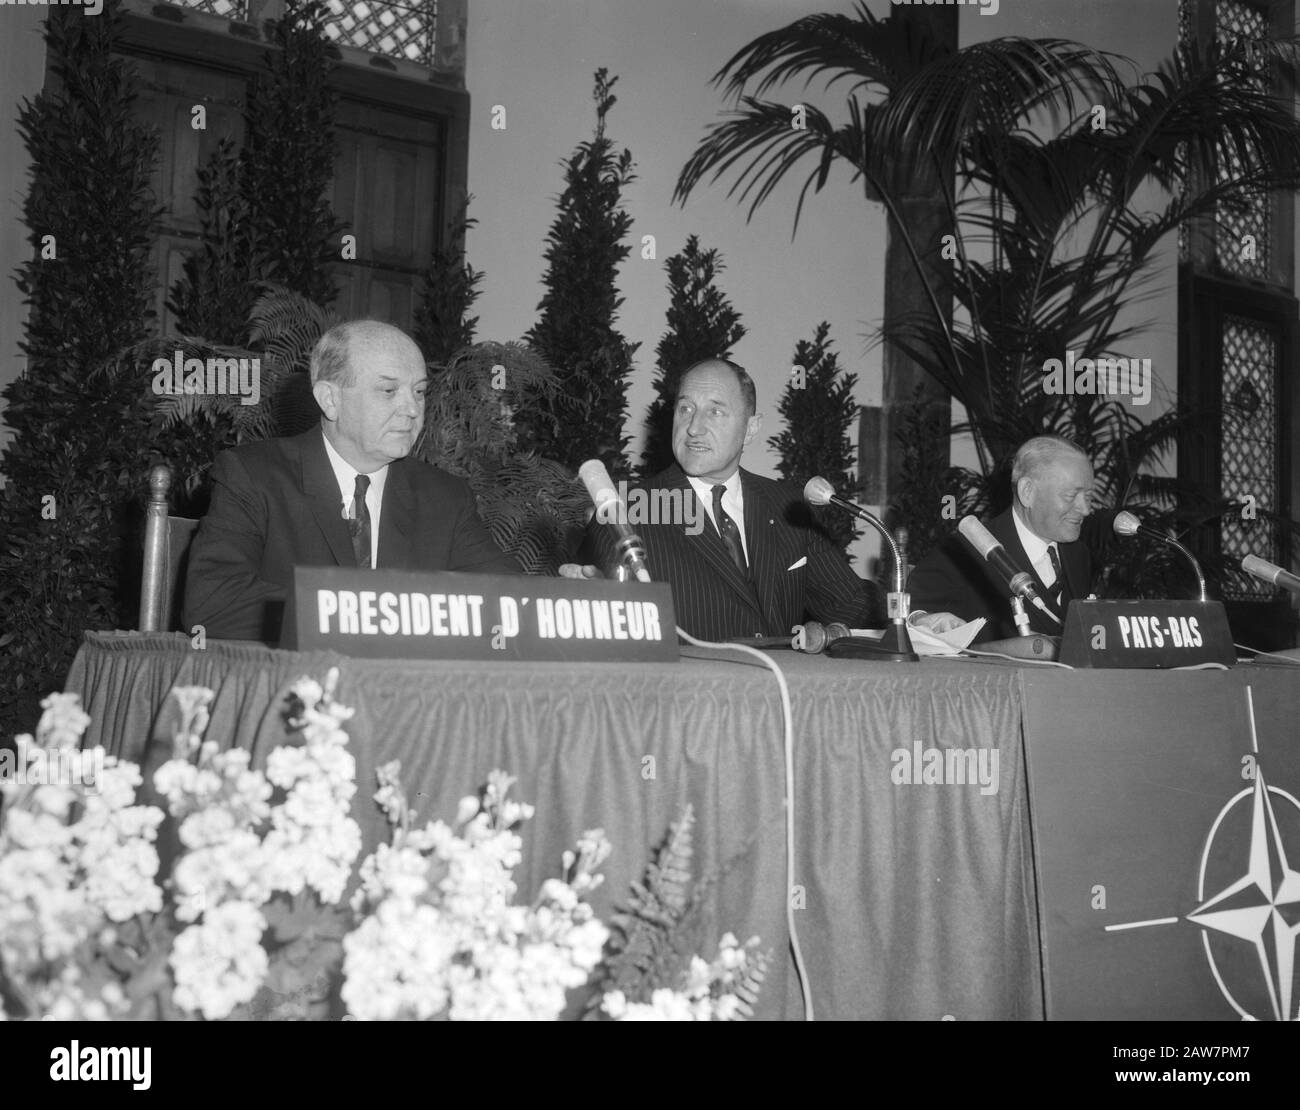 Opening NATO conference in The Hague, list time opening speech Minister Luns, right stitcher, left Dean Rusk Date: May 12, 1964 Location: The Hague, Zuid-Holland Keywords: Openings, statements, speeches Person Name: Luns, JAMH, Luns, Joseph, Rusk, Dean Institution Name: NATO Stock Photo